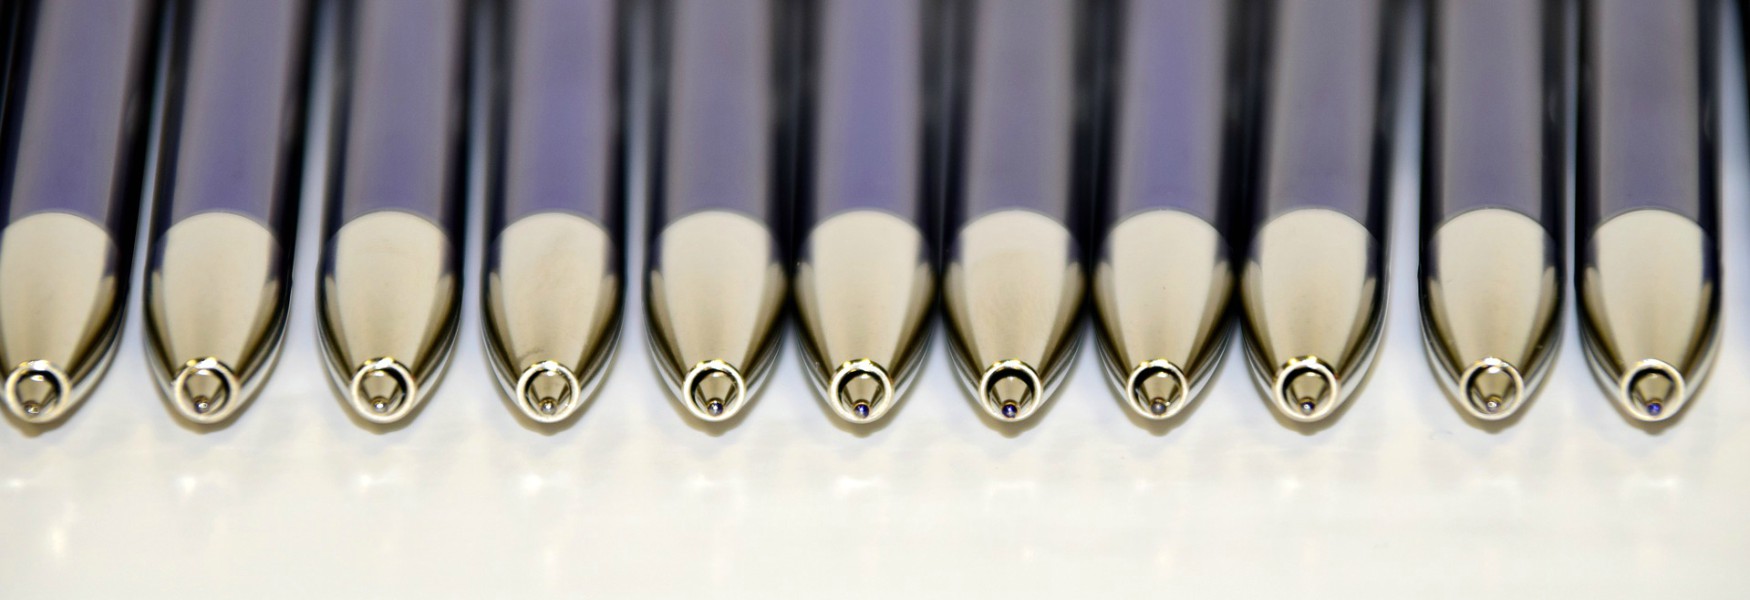 The Biro, the invention that changed the writing game